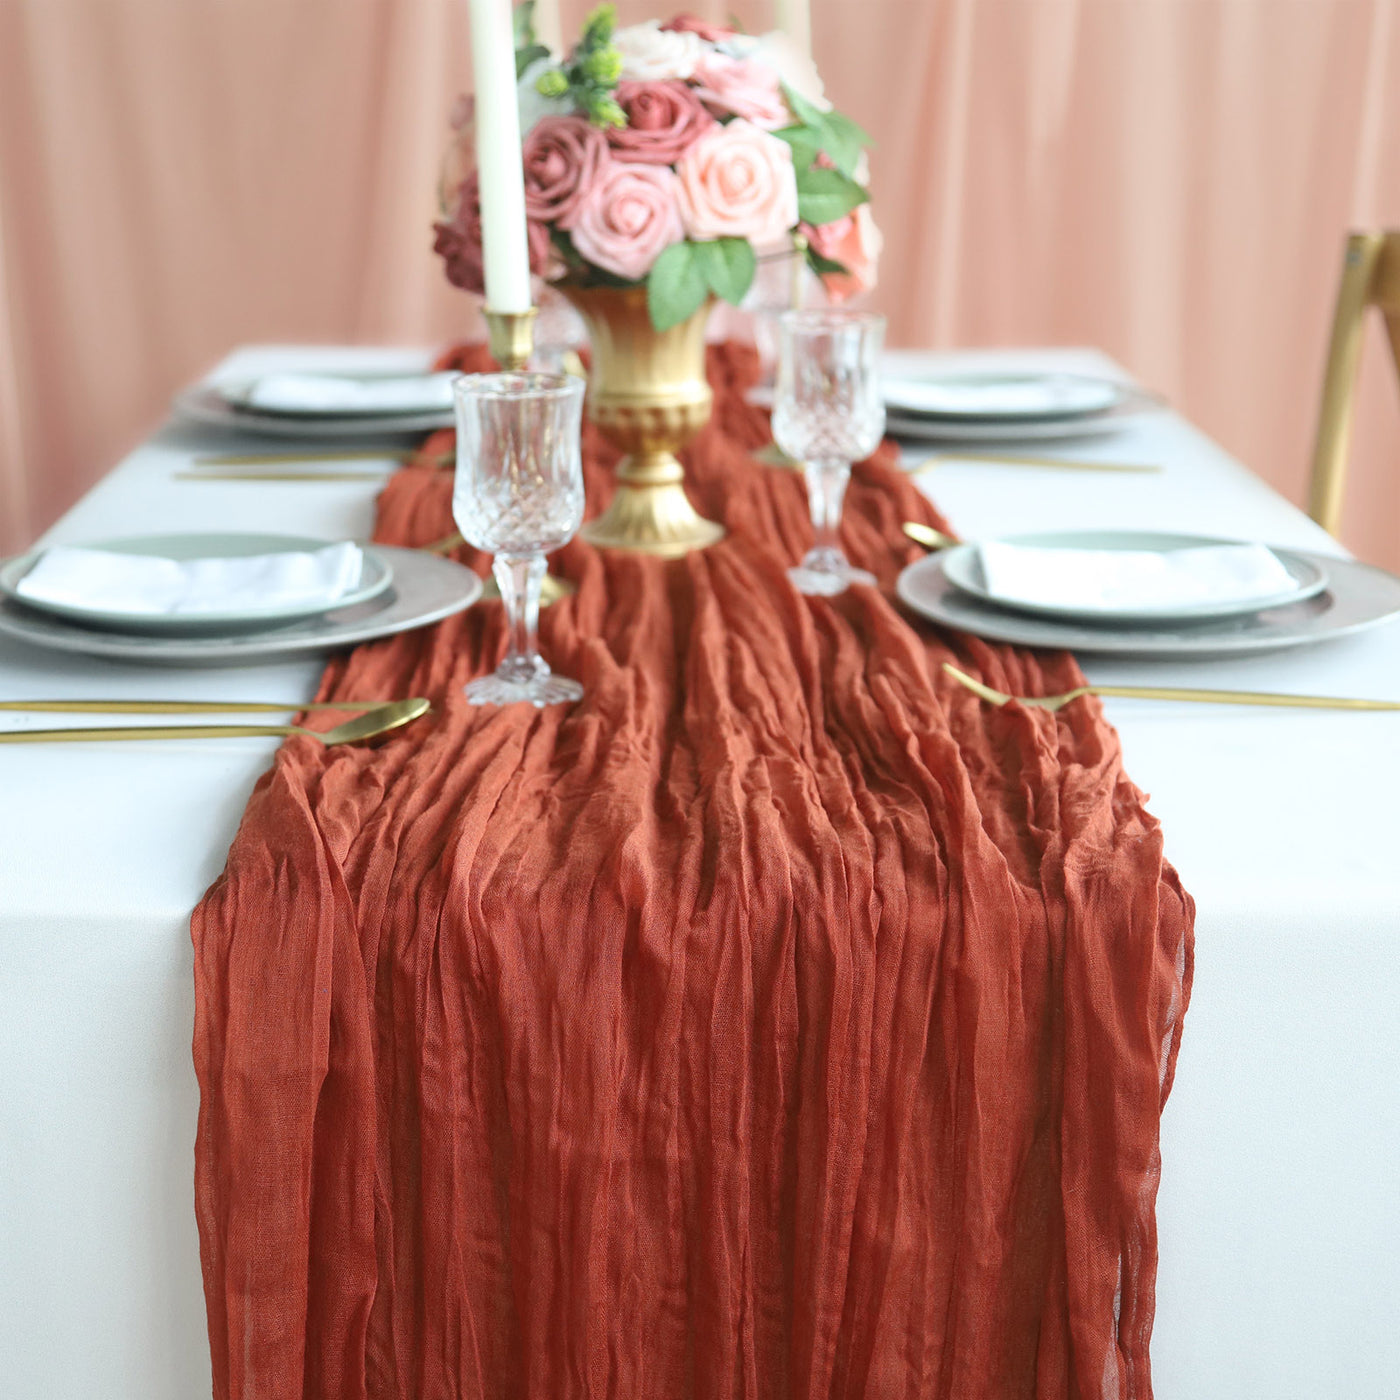 2 Pcs Cheesecloth Table Runner - Terracotta